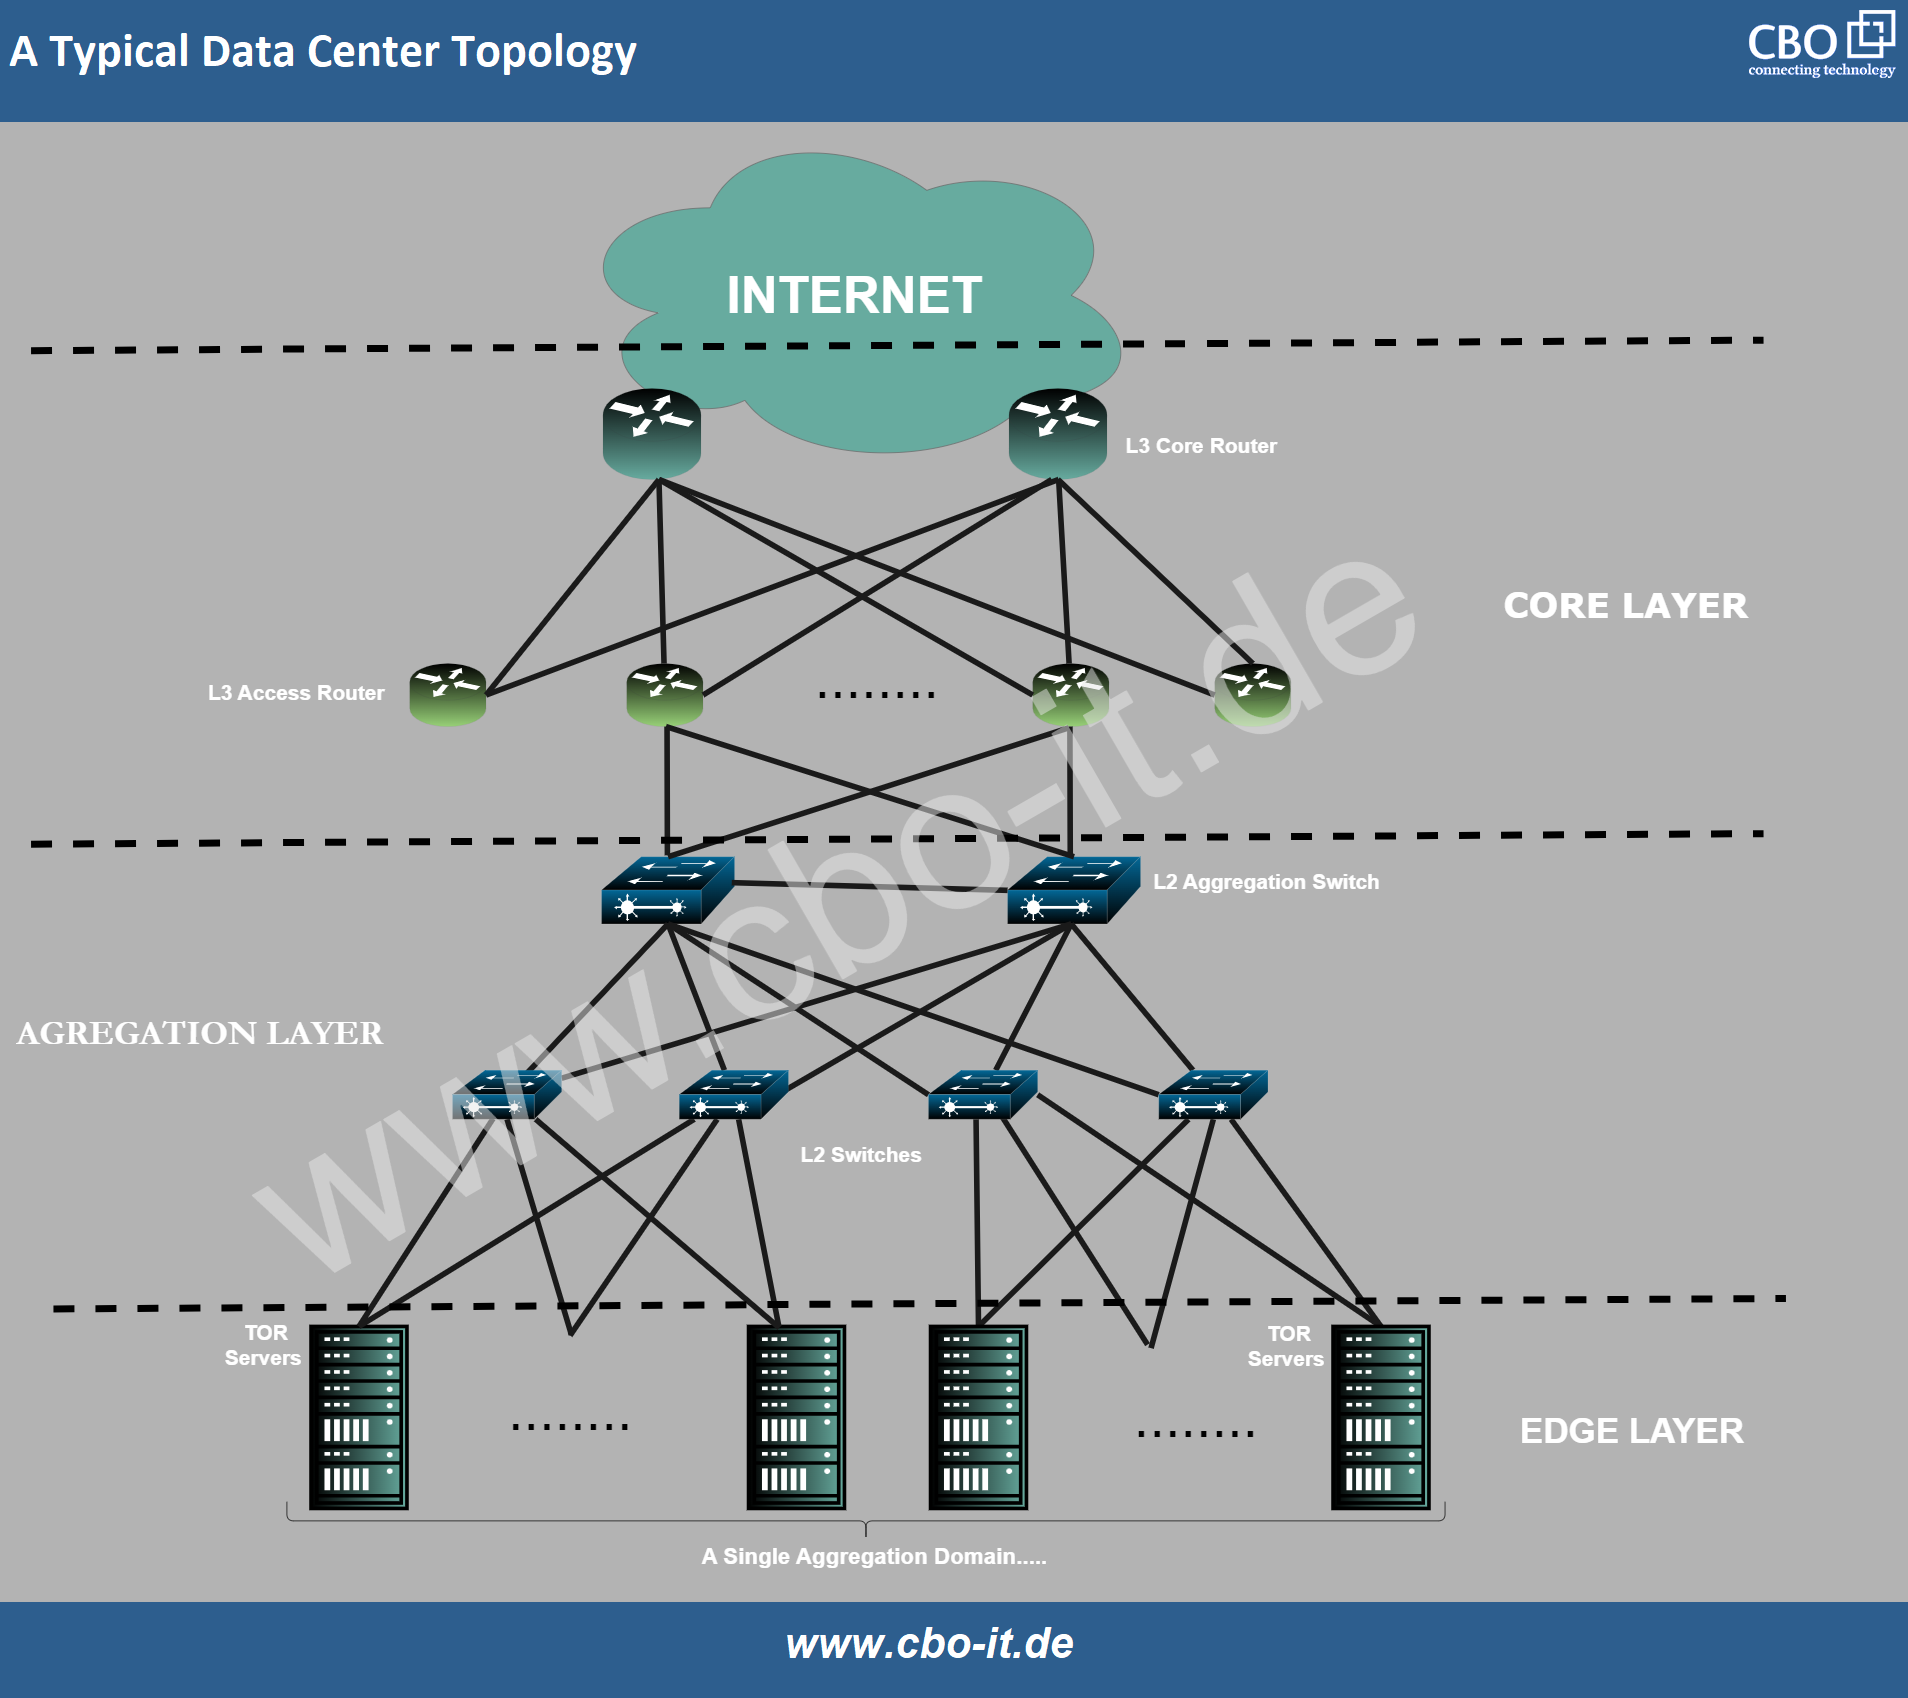 A Typical Data Center Topology